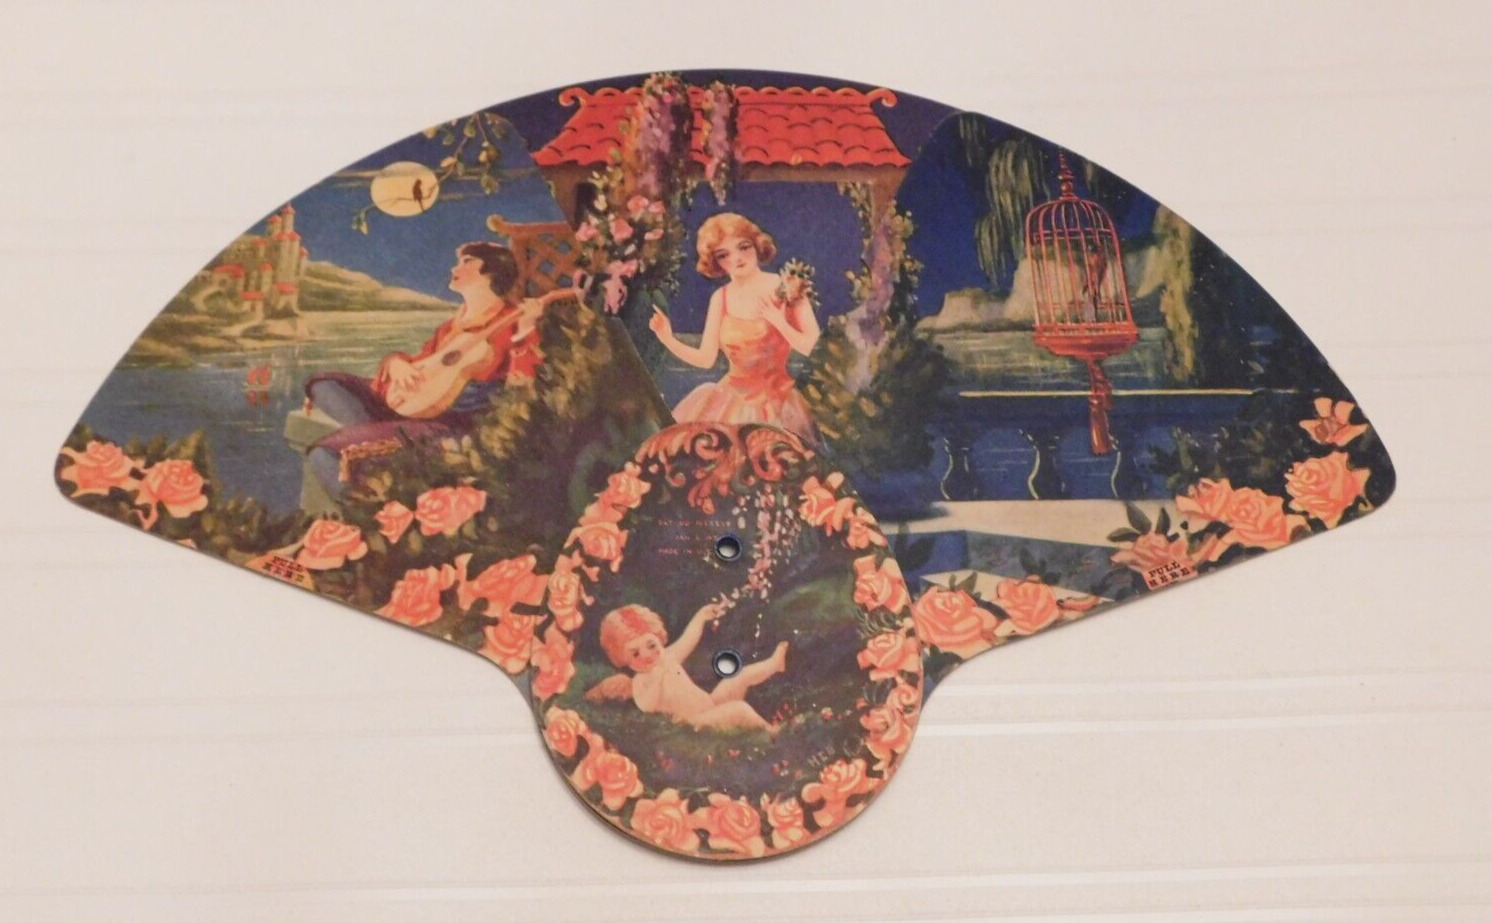 Vintage 1930s Advertising Hand Fan 3 Panel Political Judge of Orphan\'s Court